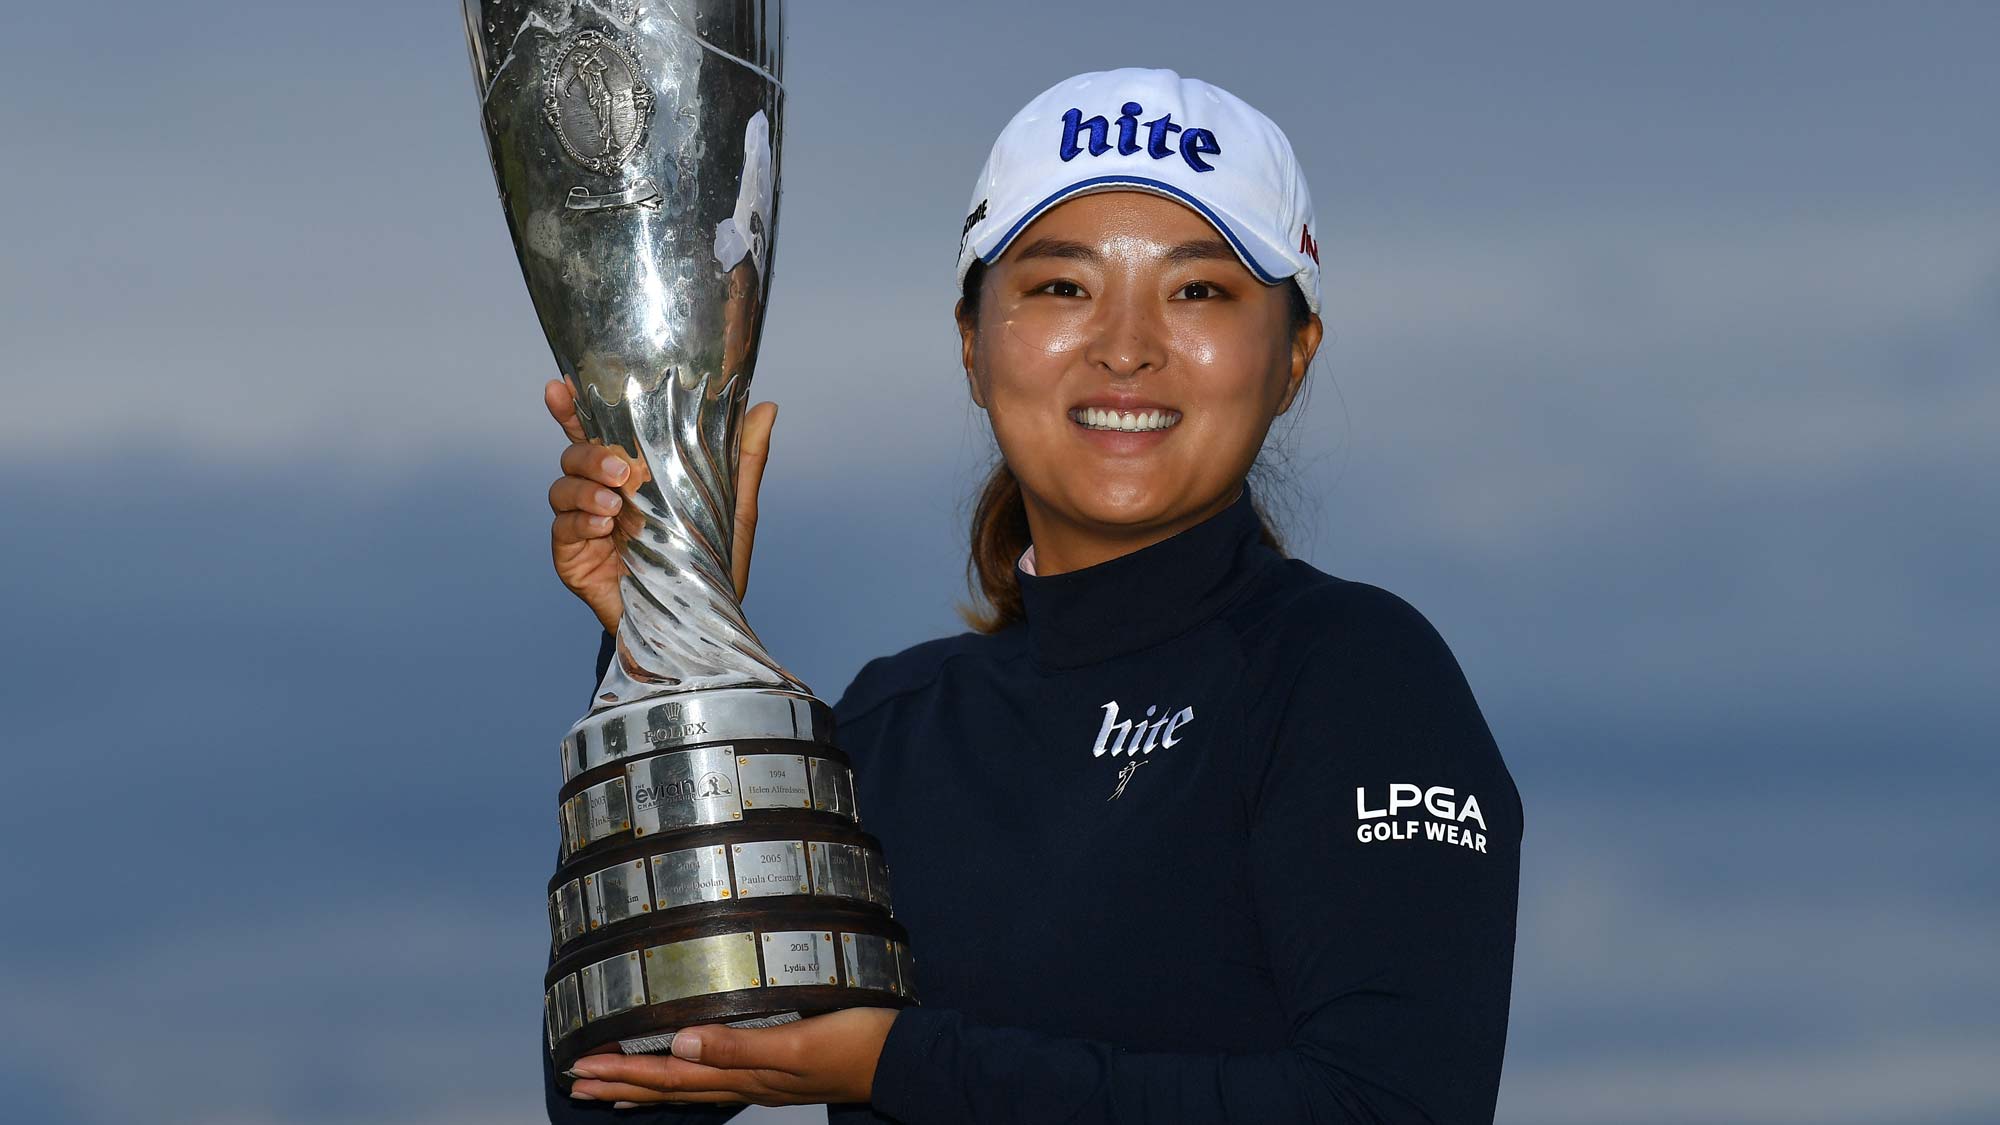 Jin Young Ko has her #BagsPacked for the 2020 Diamond Resorts Tournament of Champions after her win at the Evian Championship